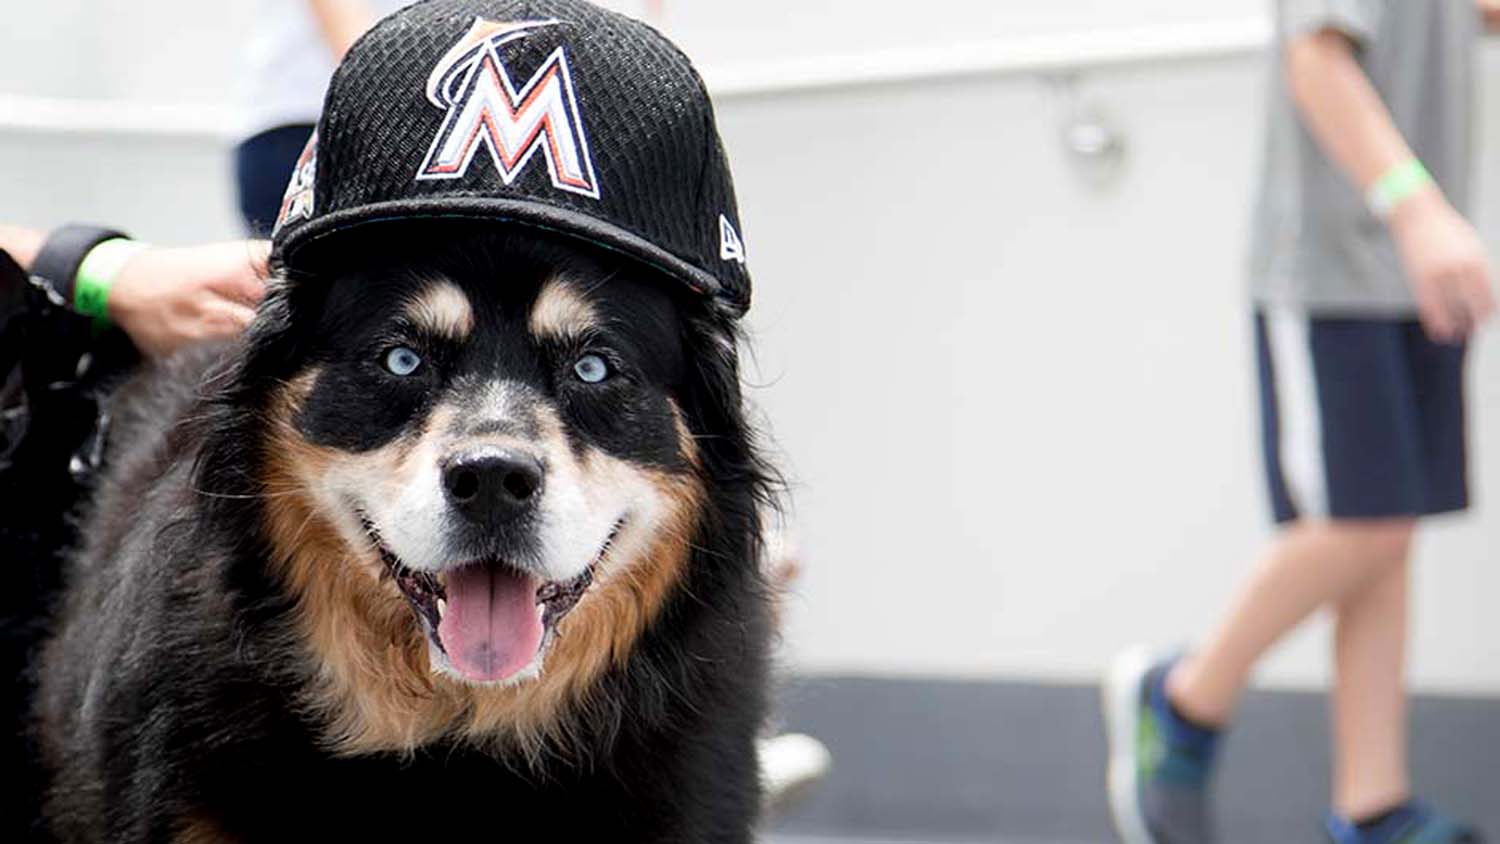 'Bring Your Dog to 'Bark in the Park' with the Miami Marlins